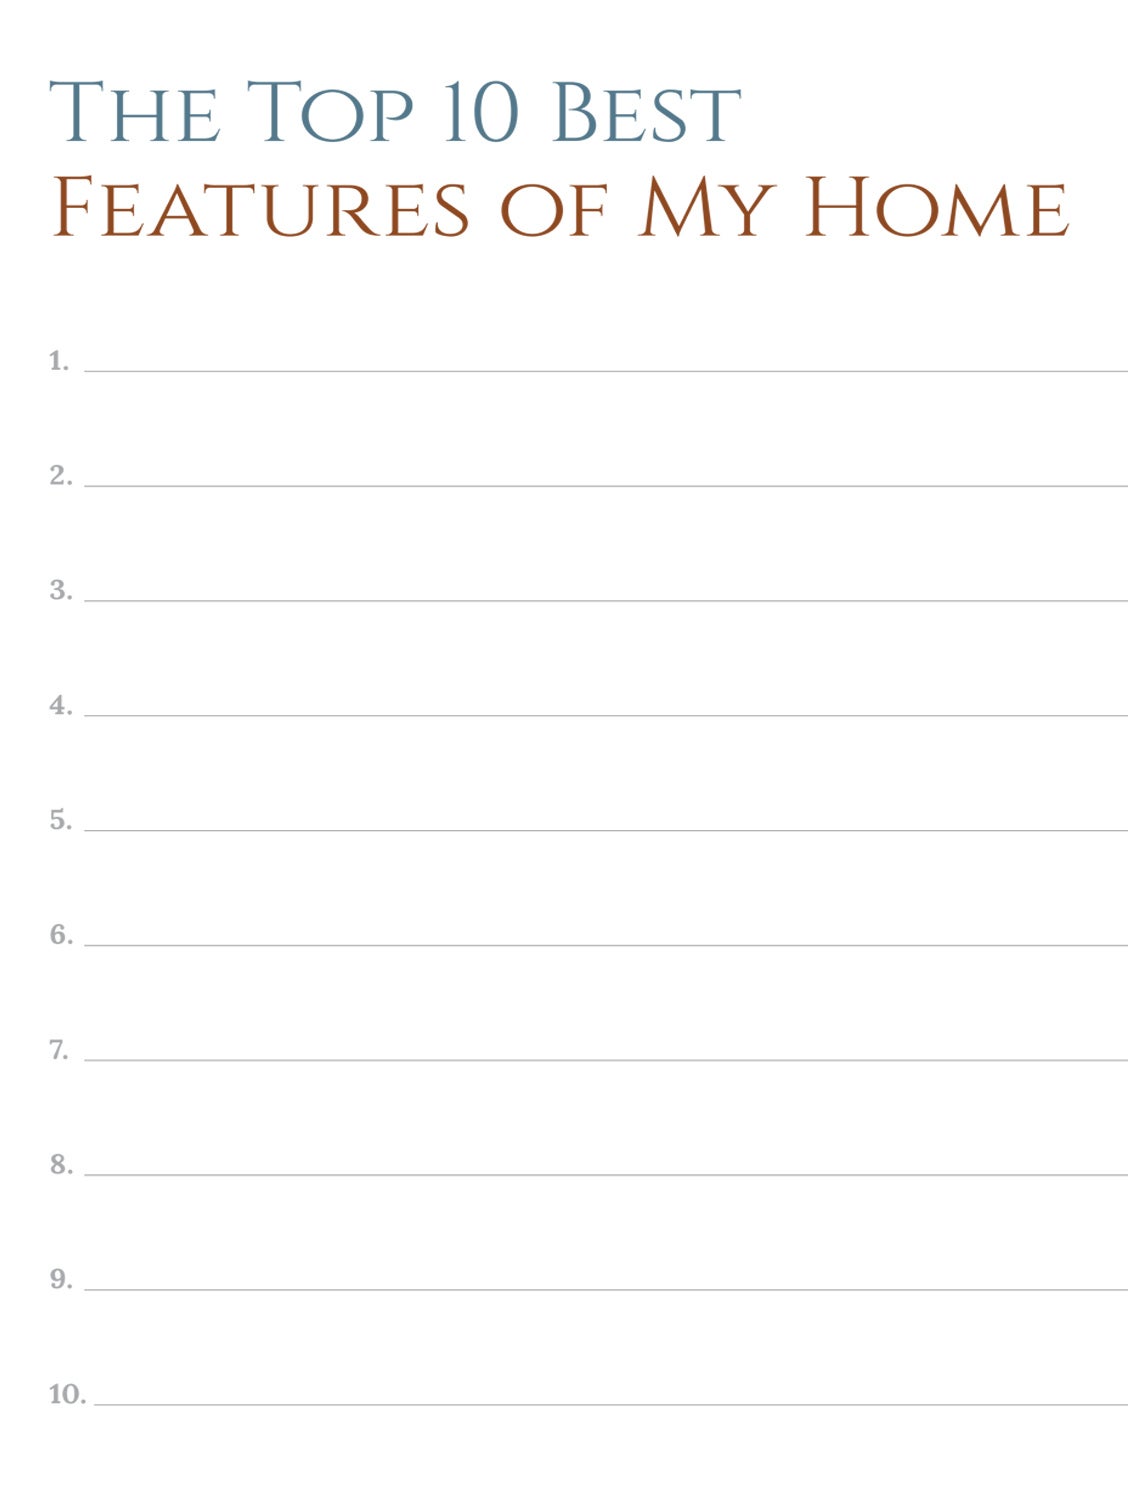 Top 10 best features of my home